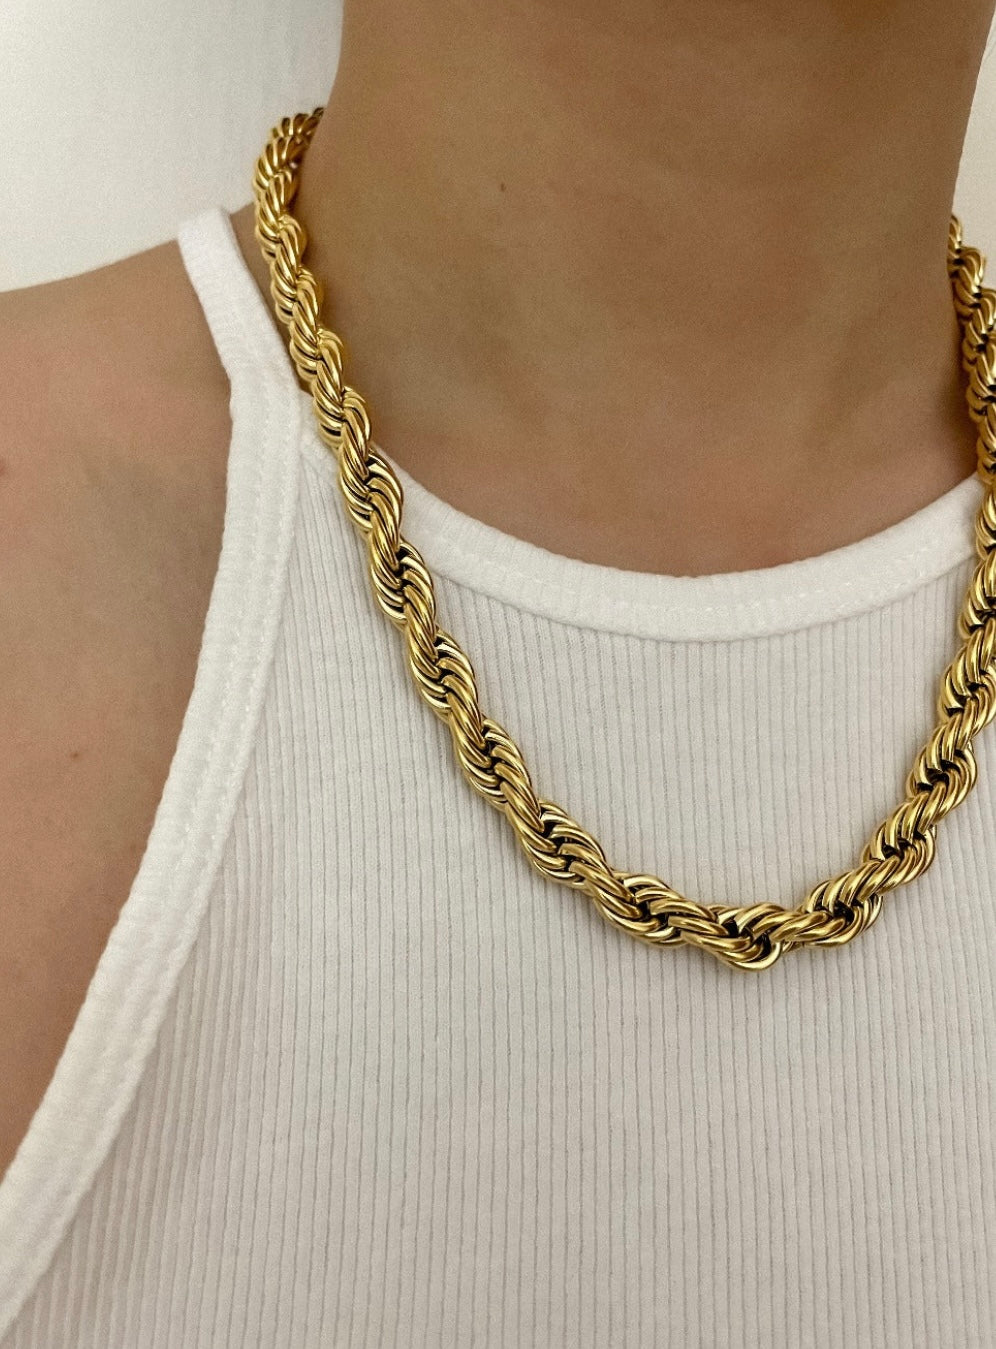 Short Italian Braided Chain Necklace - 4mm Thick